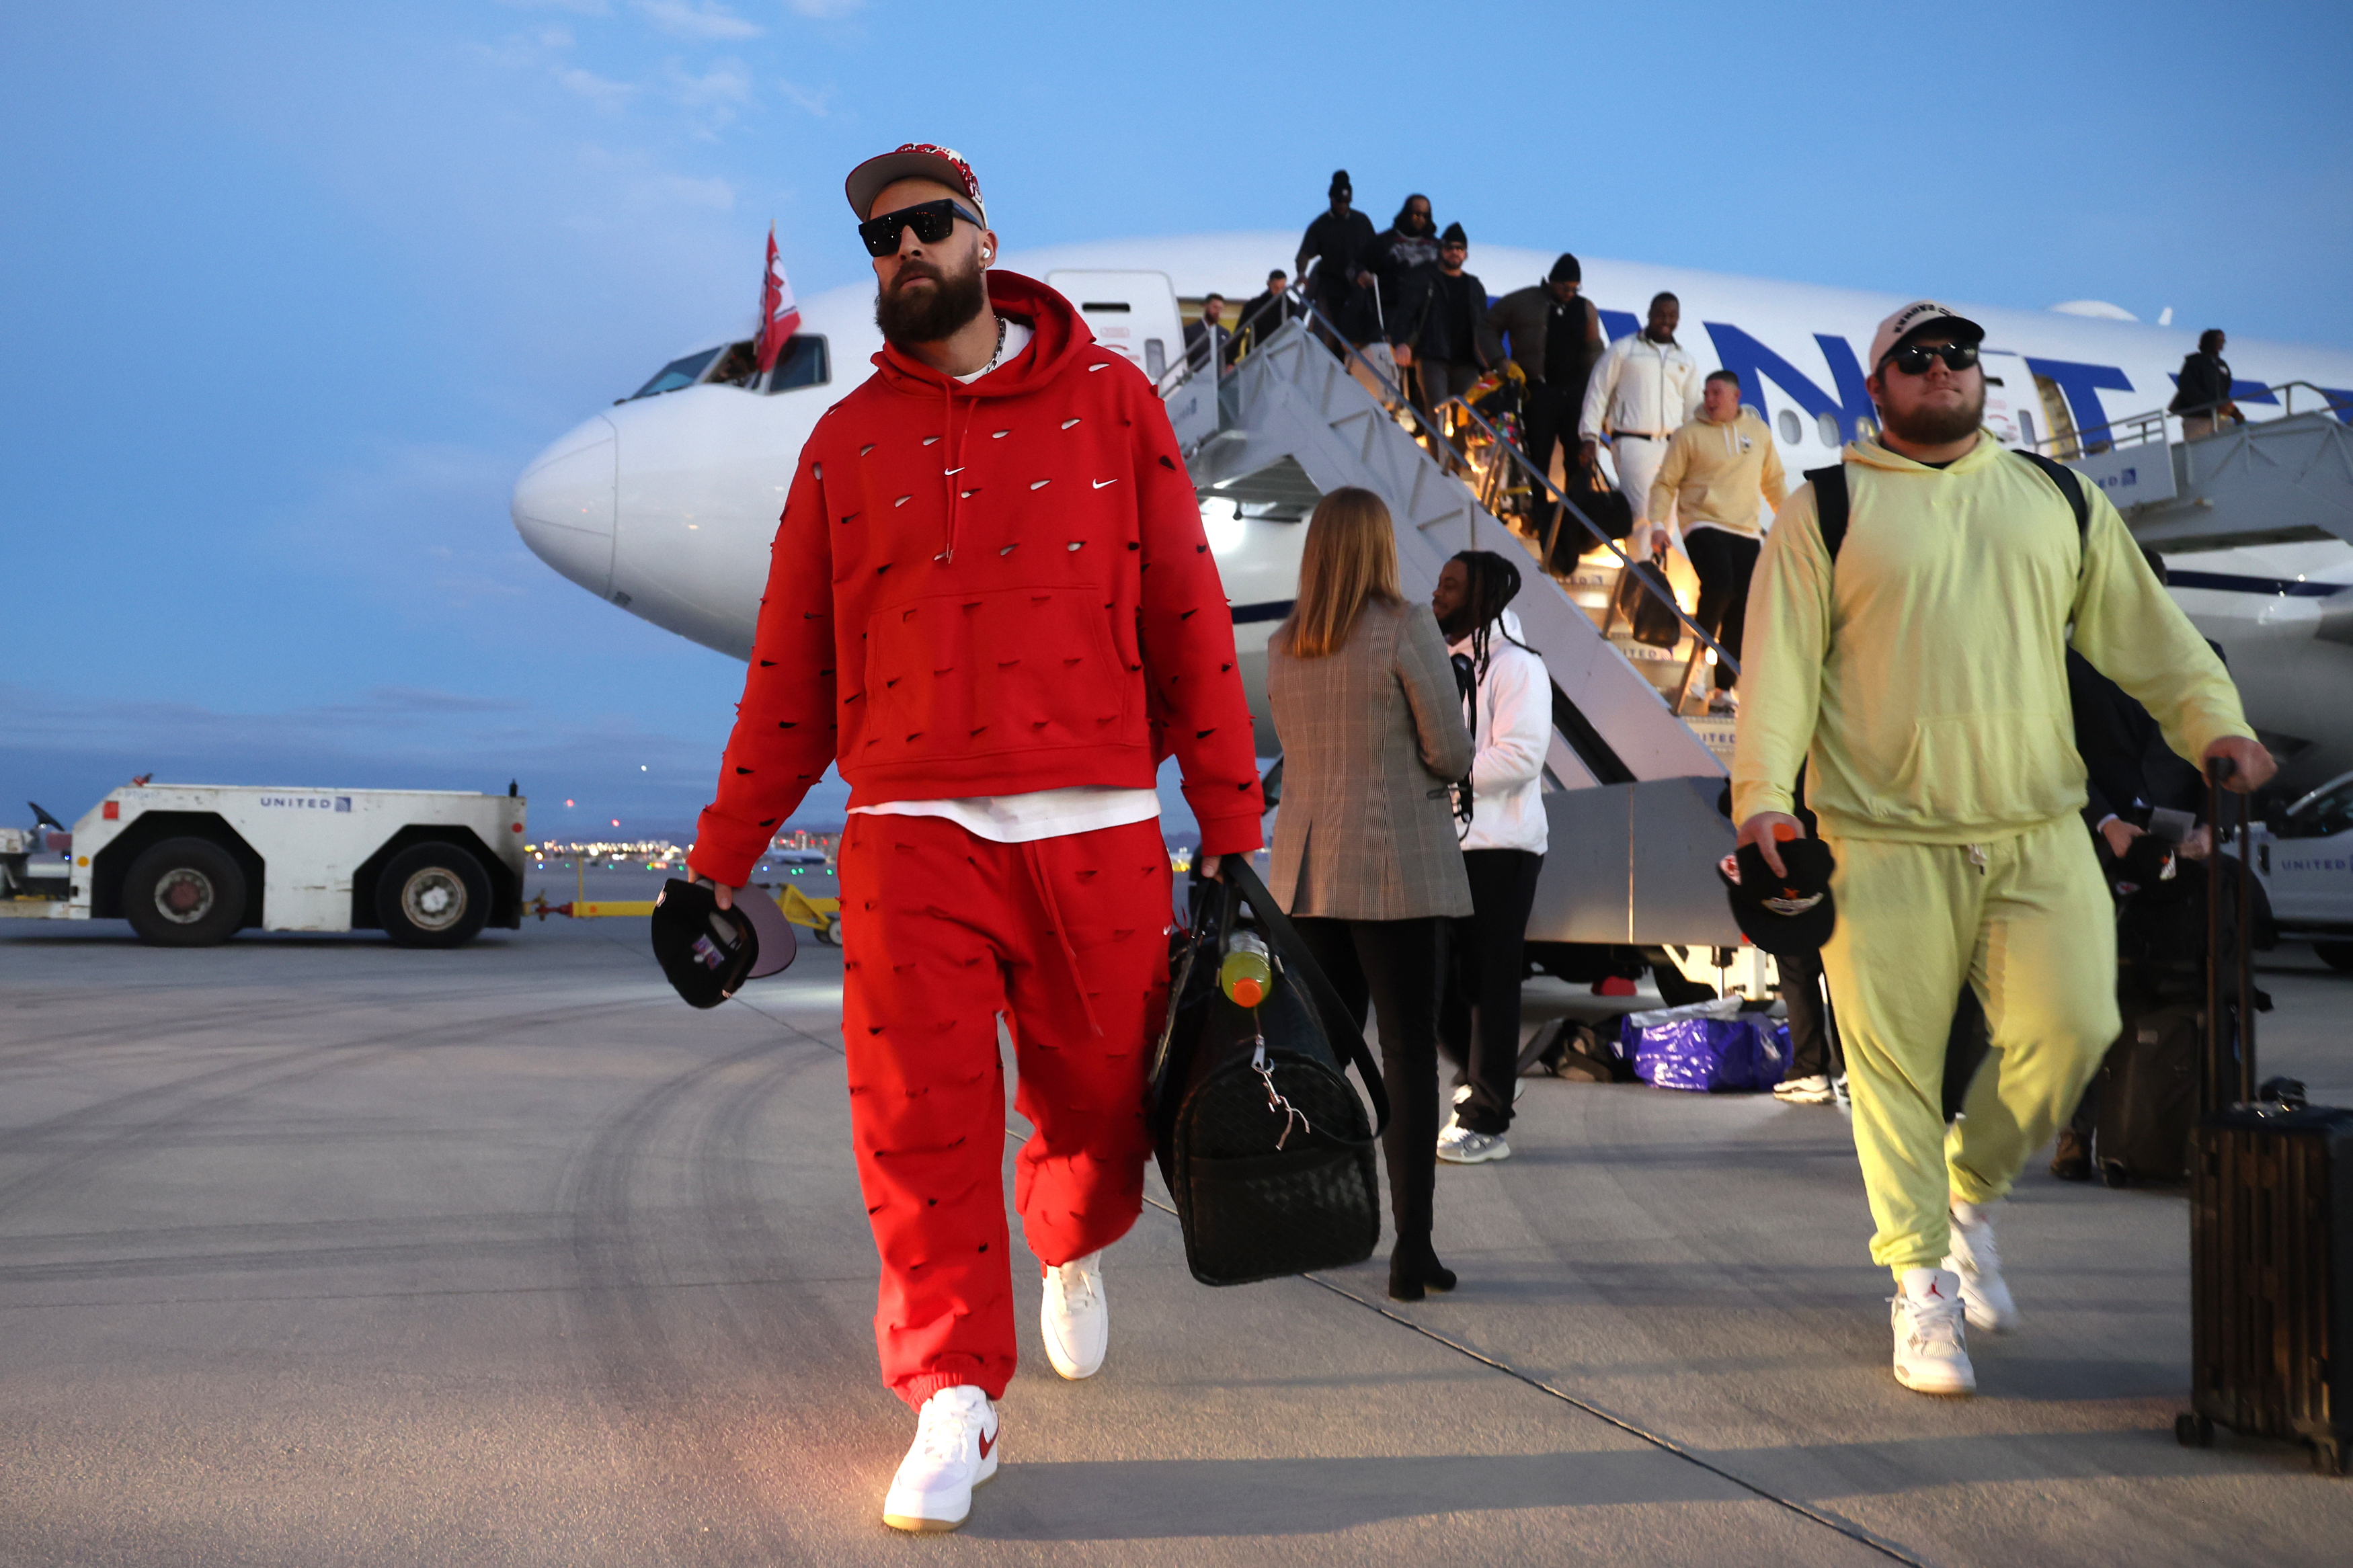 man in a red track suit walks off a plane with a lot of other people following behind